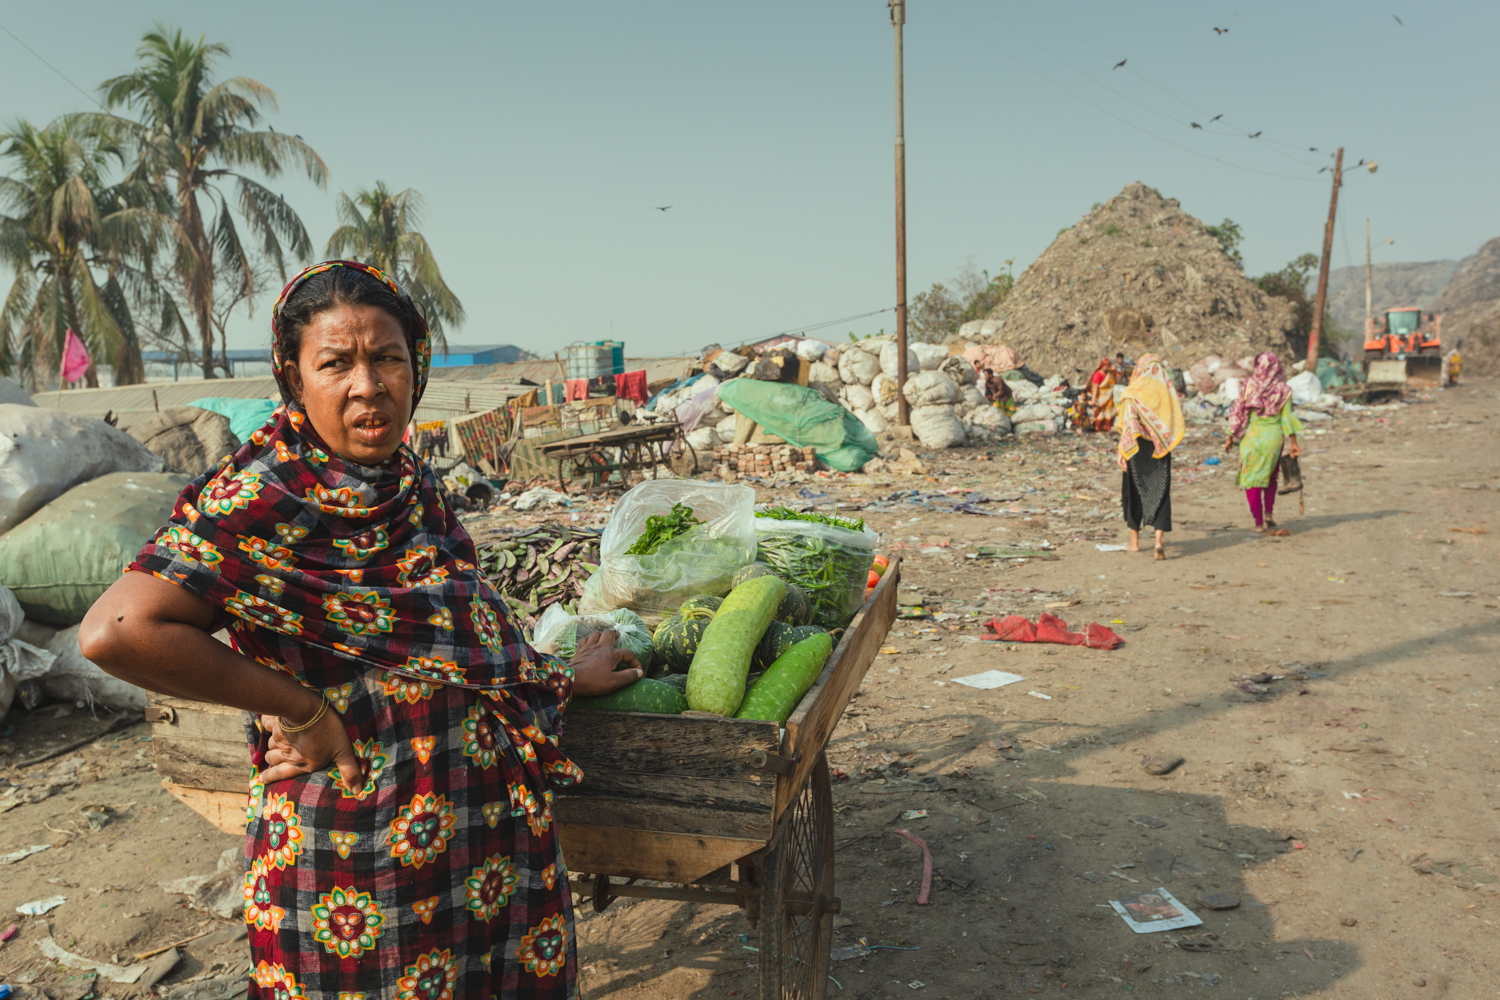 Food can be purchased with the proceeds of Waste Collection in Chittagong, Bangladesh.